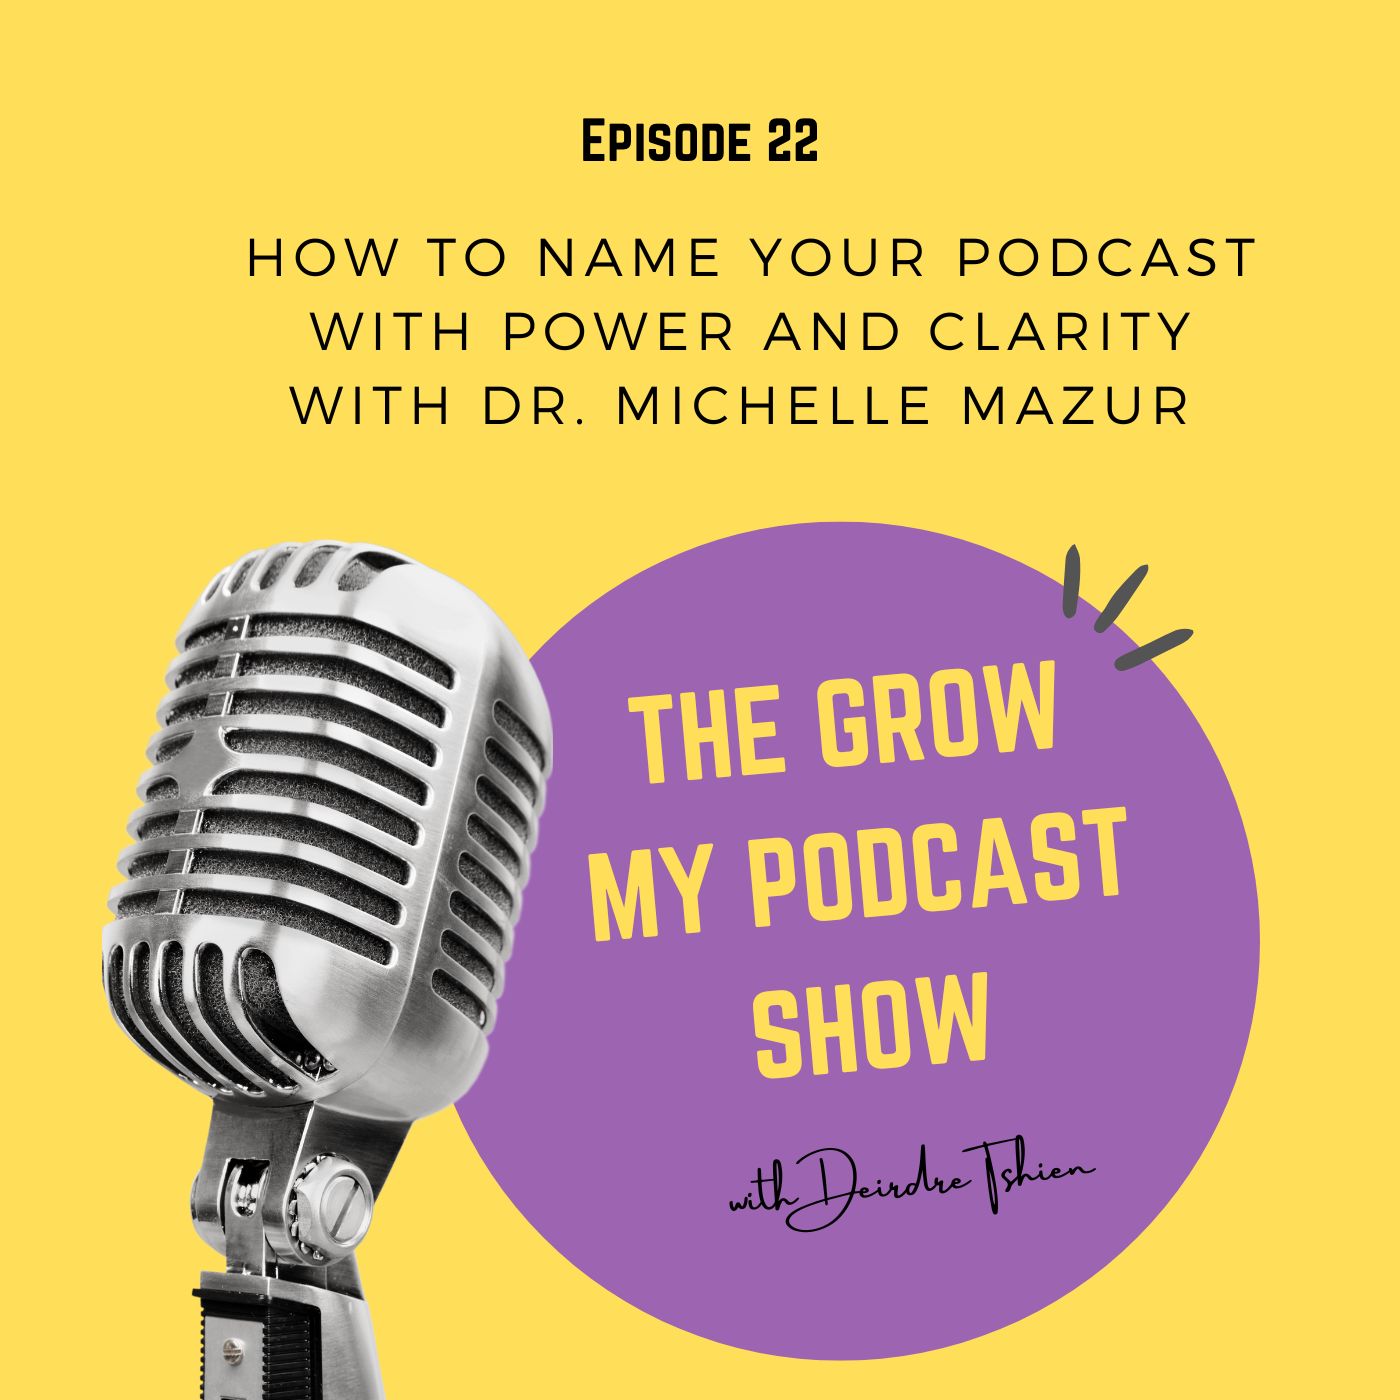 How to Name Your Podcast with Power and Clarity with Dr. Michelle Mazur Image